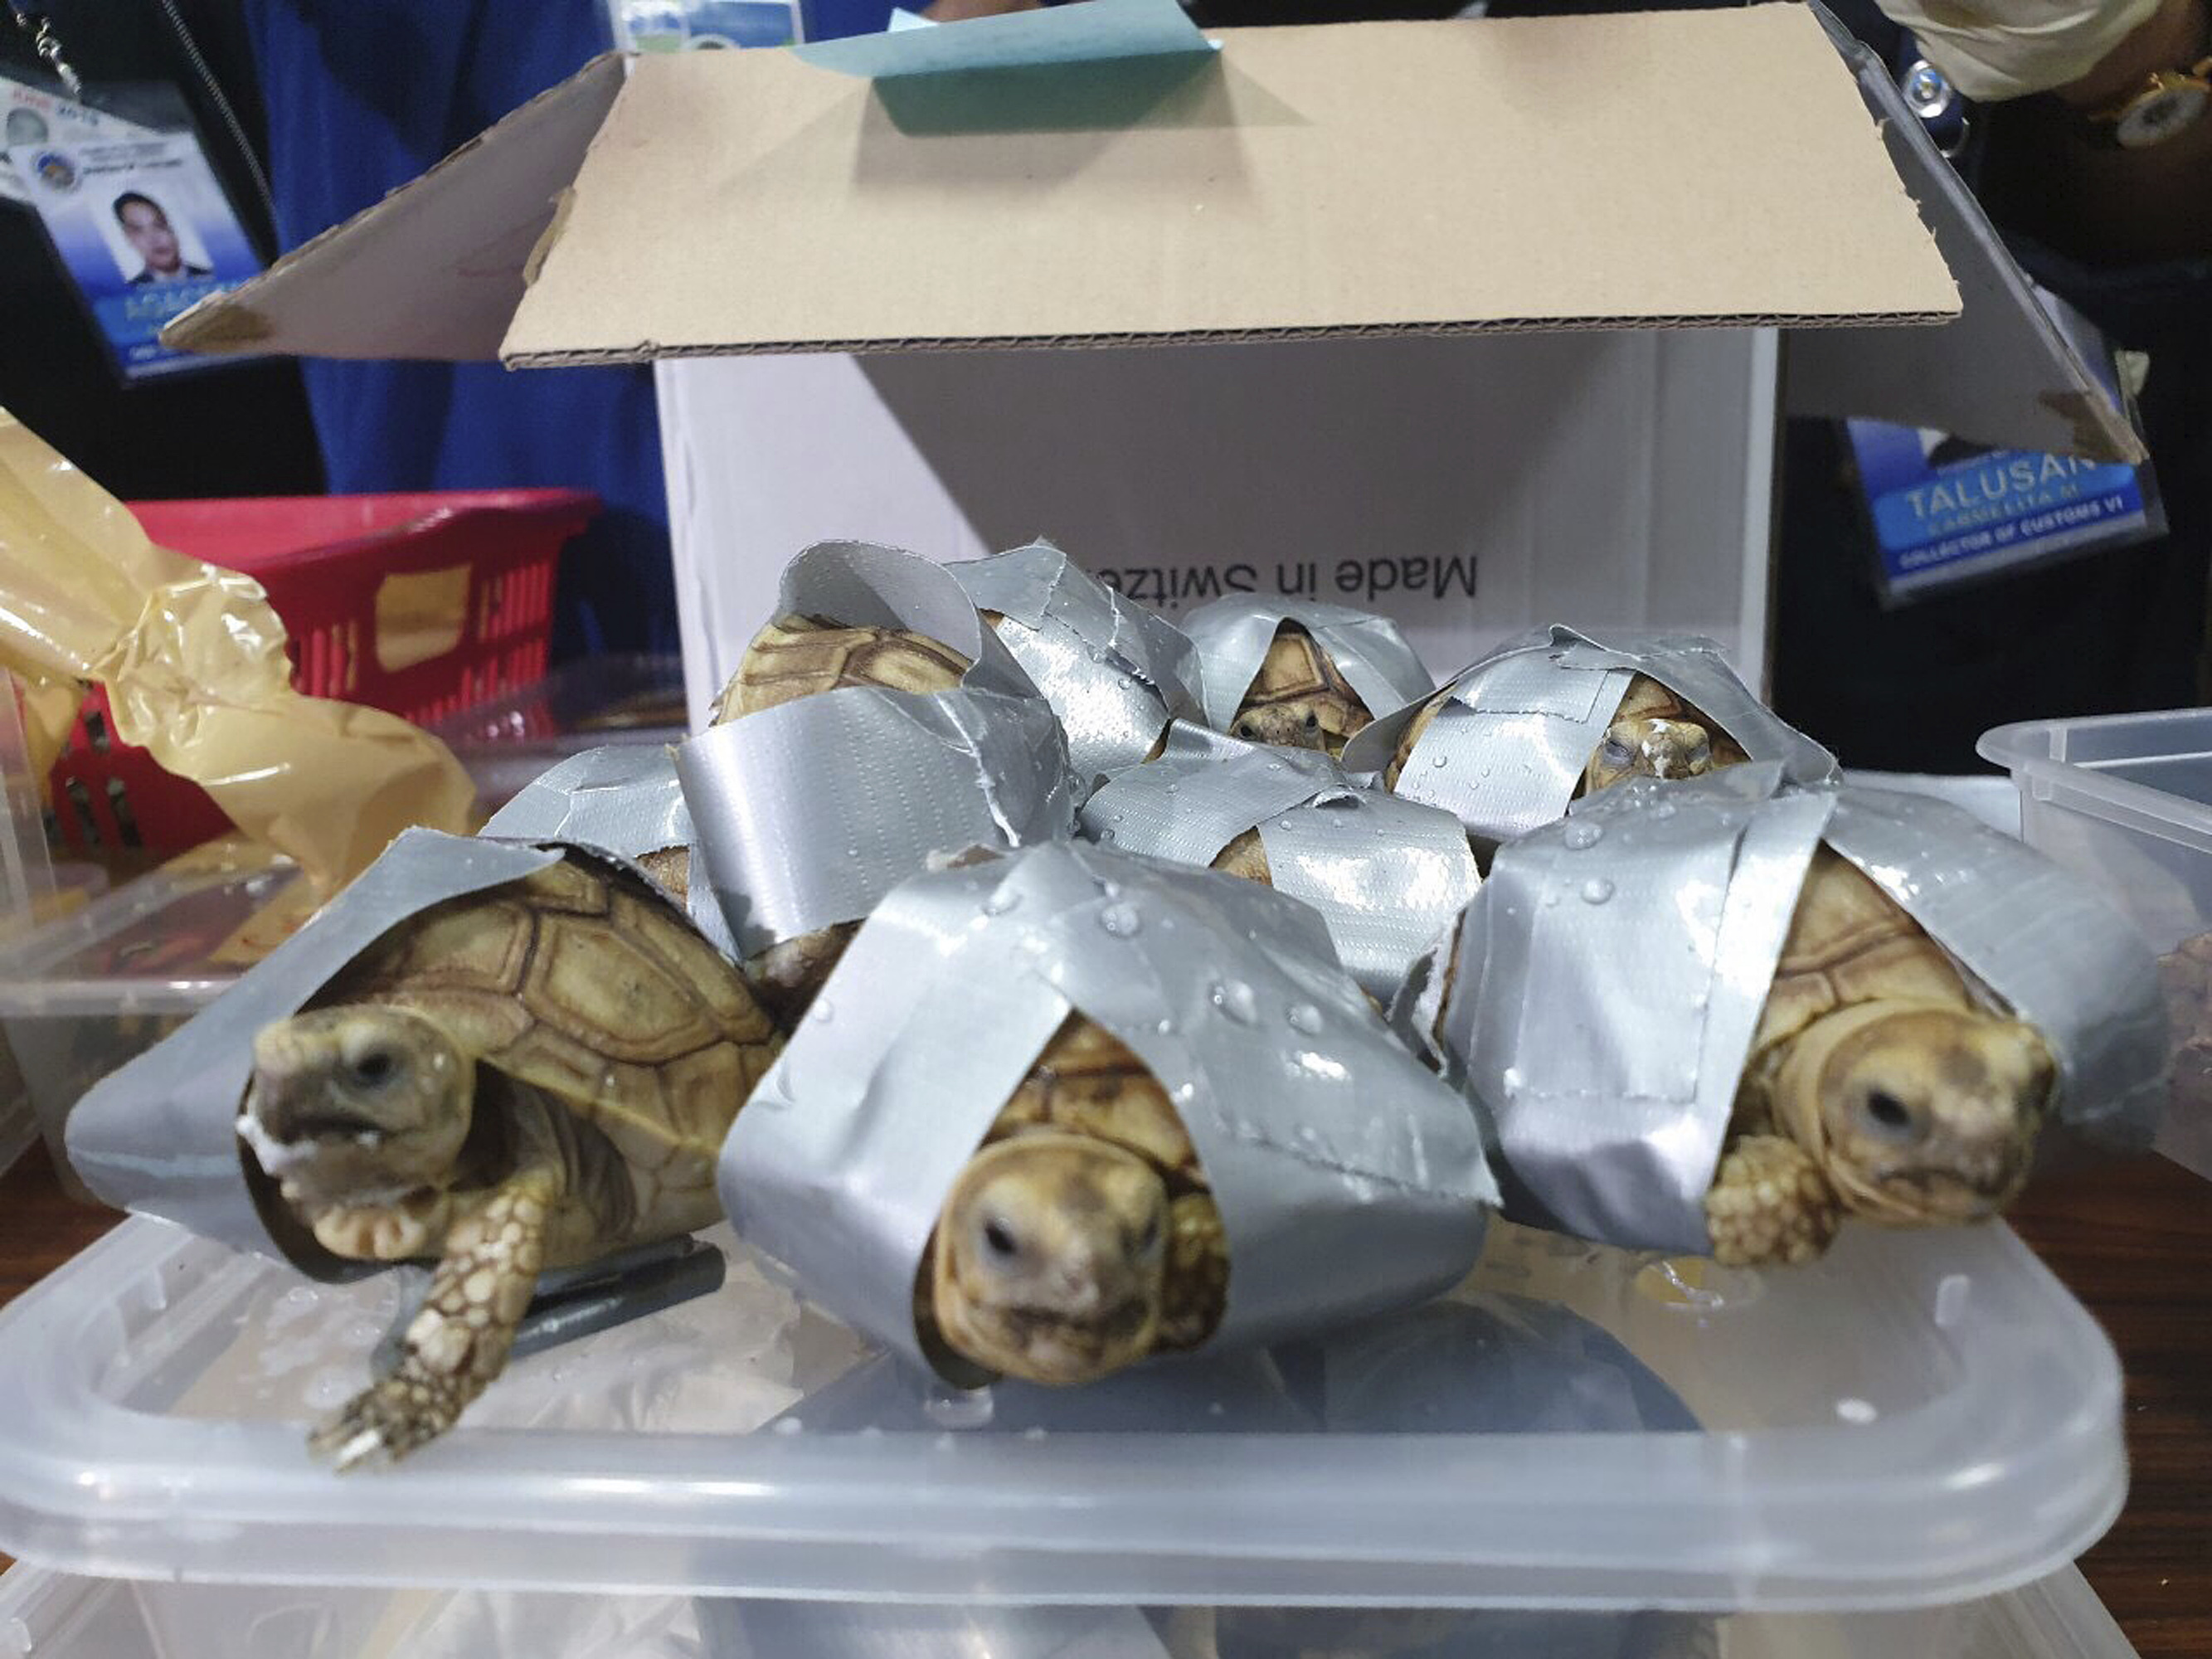 Over 1,500 turtles found inside luggage at NAIA